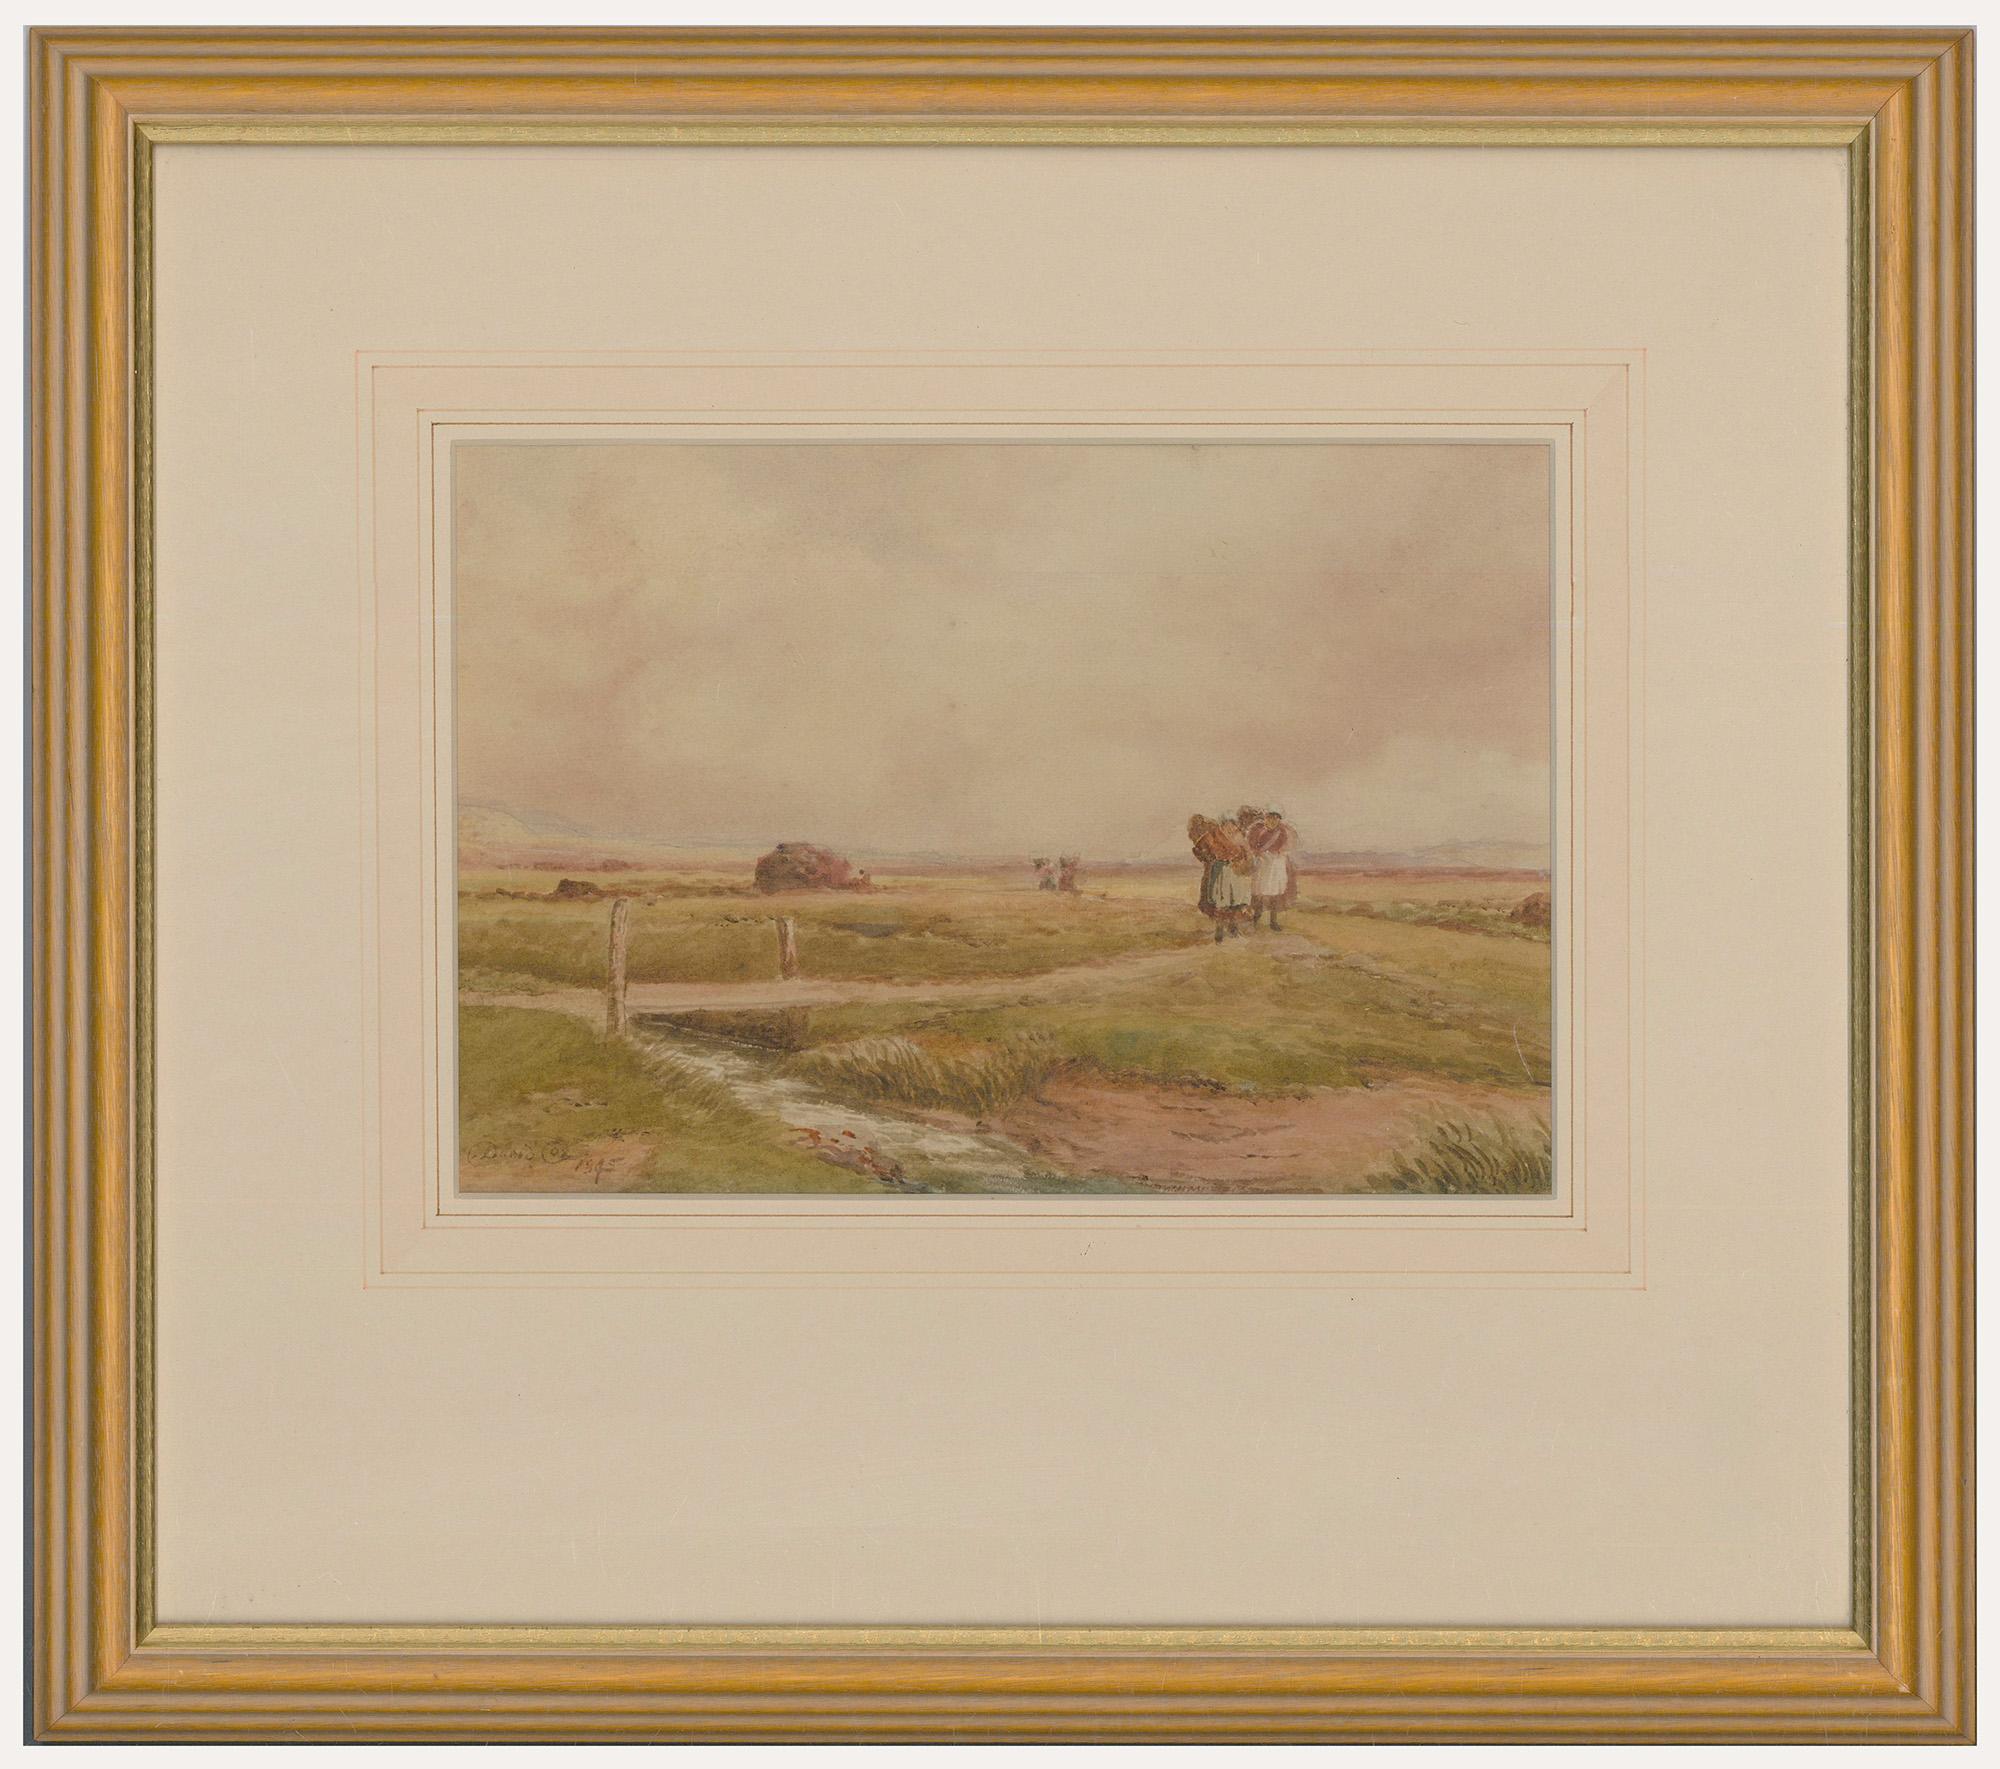 A fine 19th century watercolour by David Cox Snr depicting women returning from harvesting hay. Both carry large bales on their backs as they make their way across a small stream. Well presented in a washline mount and gilt frame. Signed and dated.